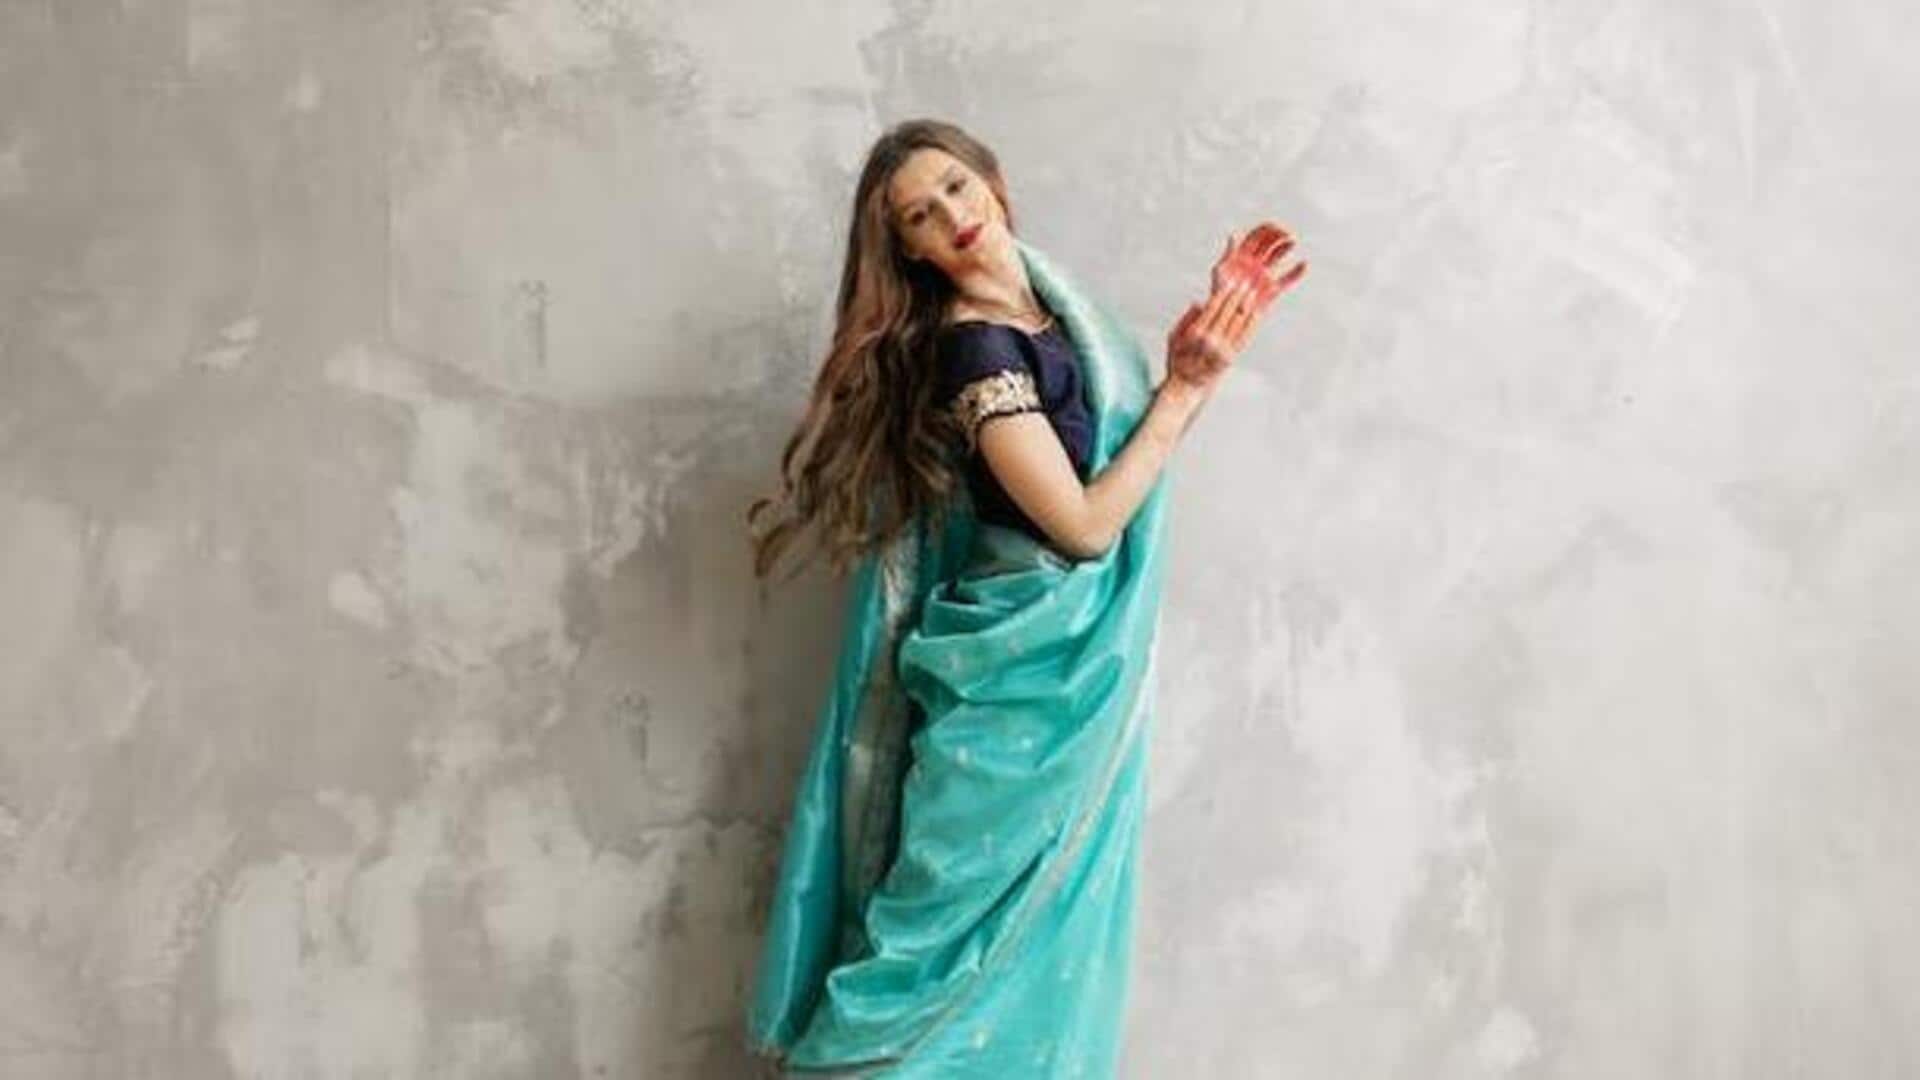 EASY-TO-WEAR GLAMOUR OF READYMADE SAREES